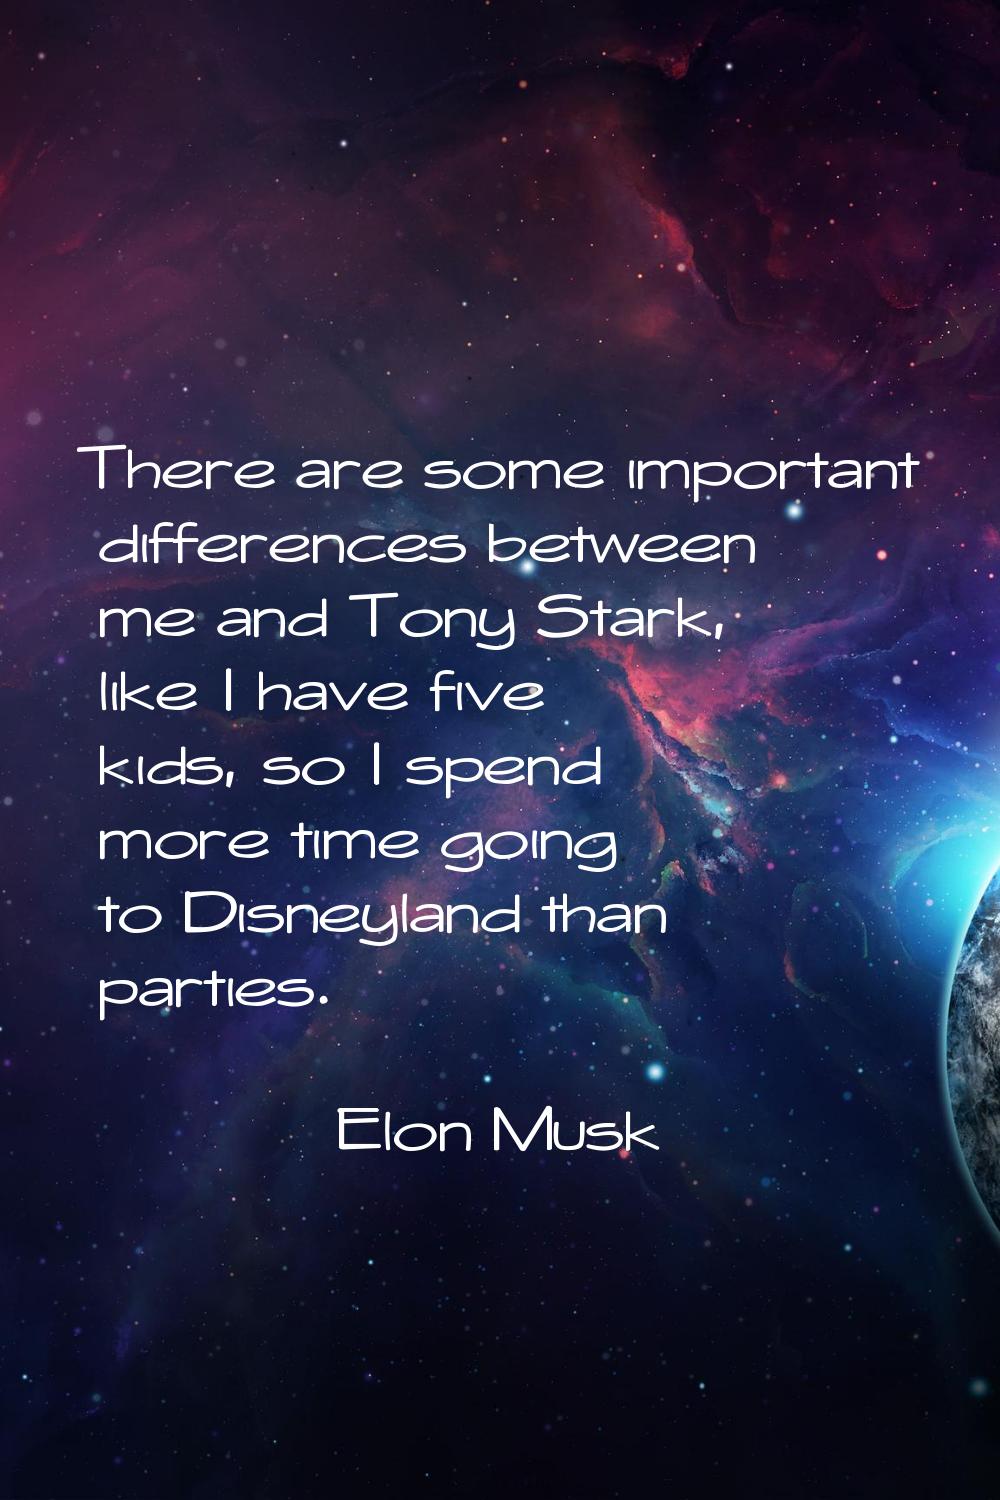 There are some important differences between me and Tony Stark, like I have five kids, so I spend m